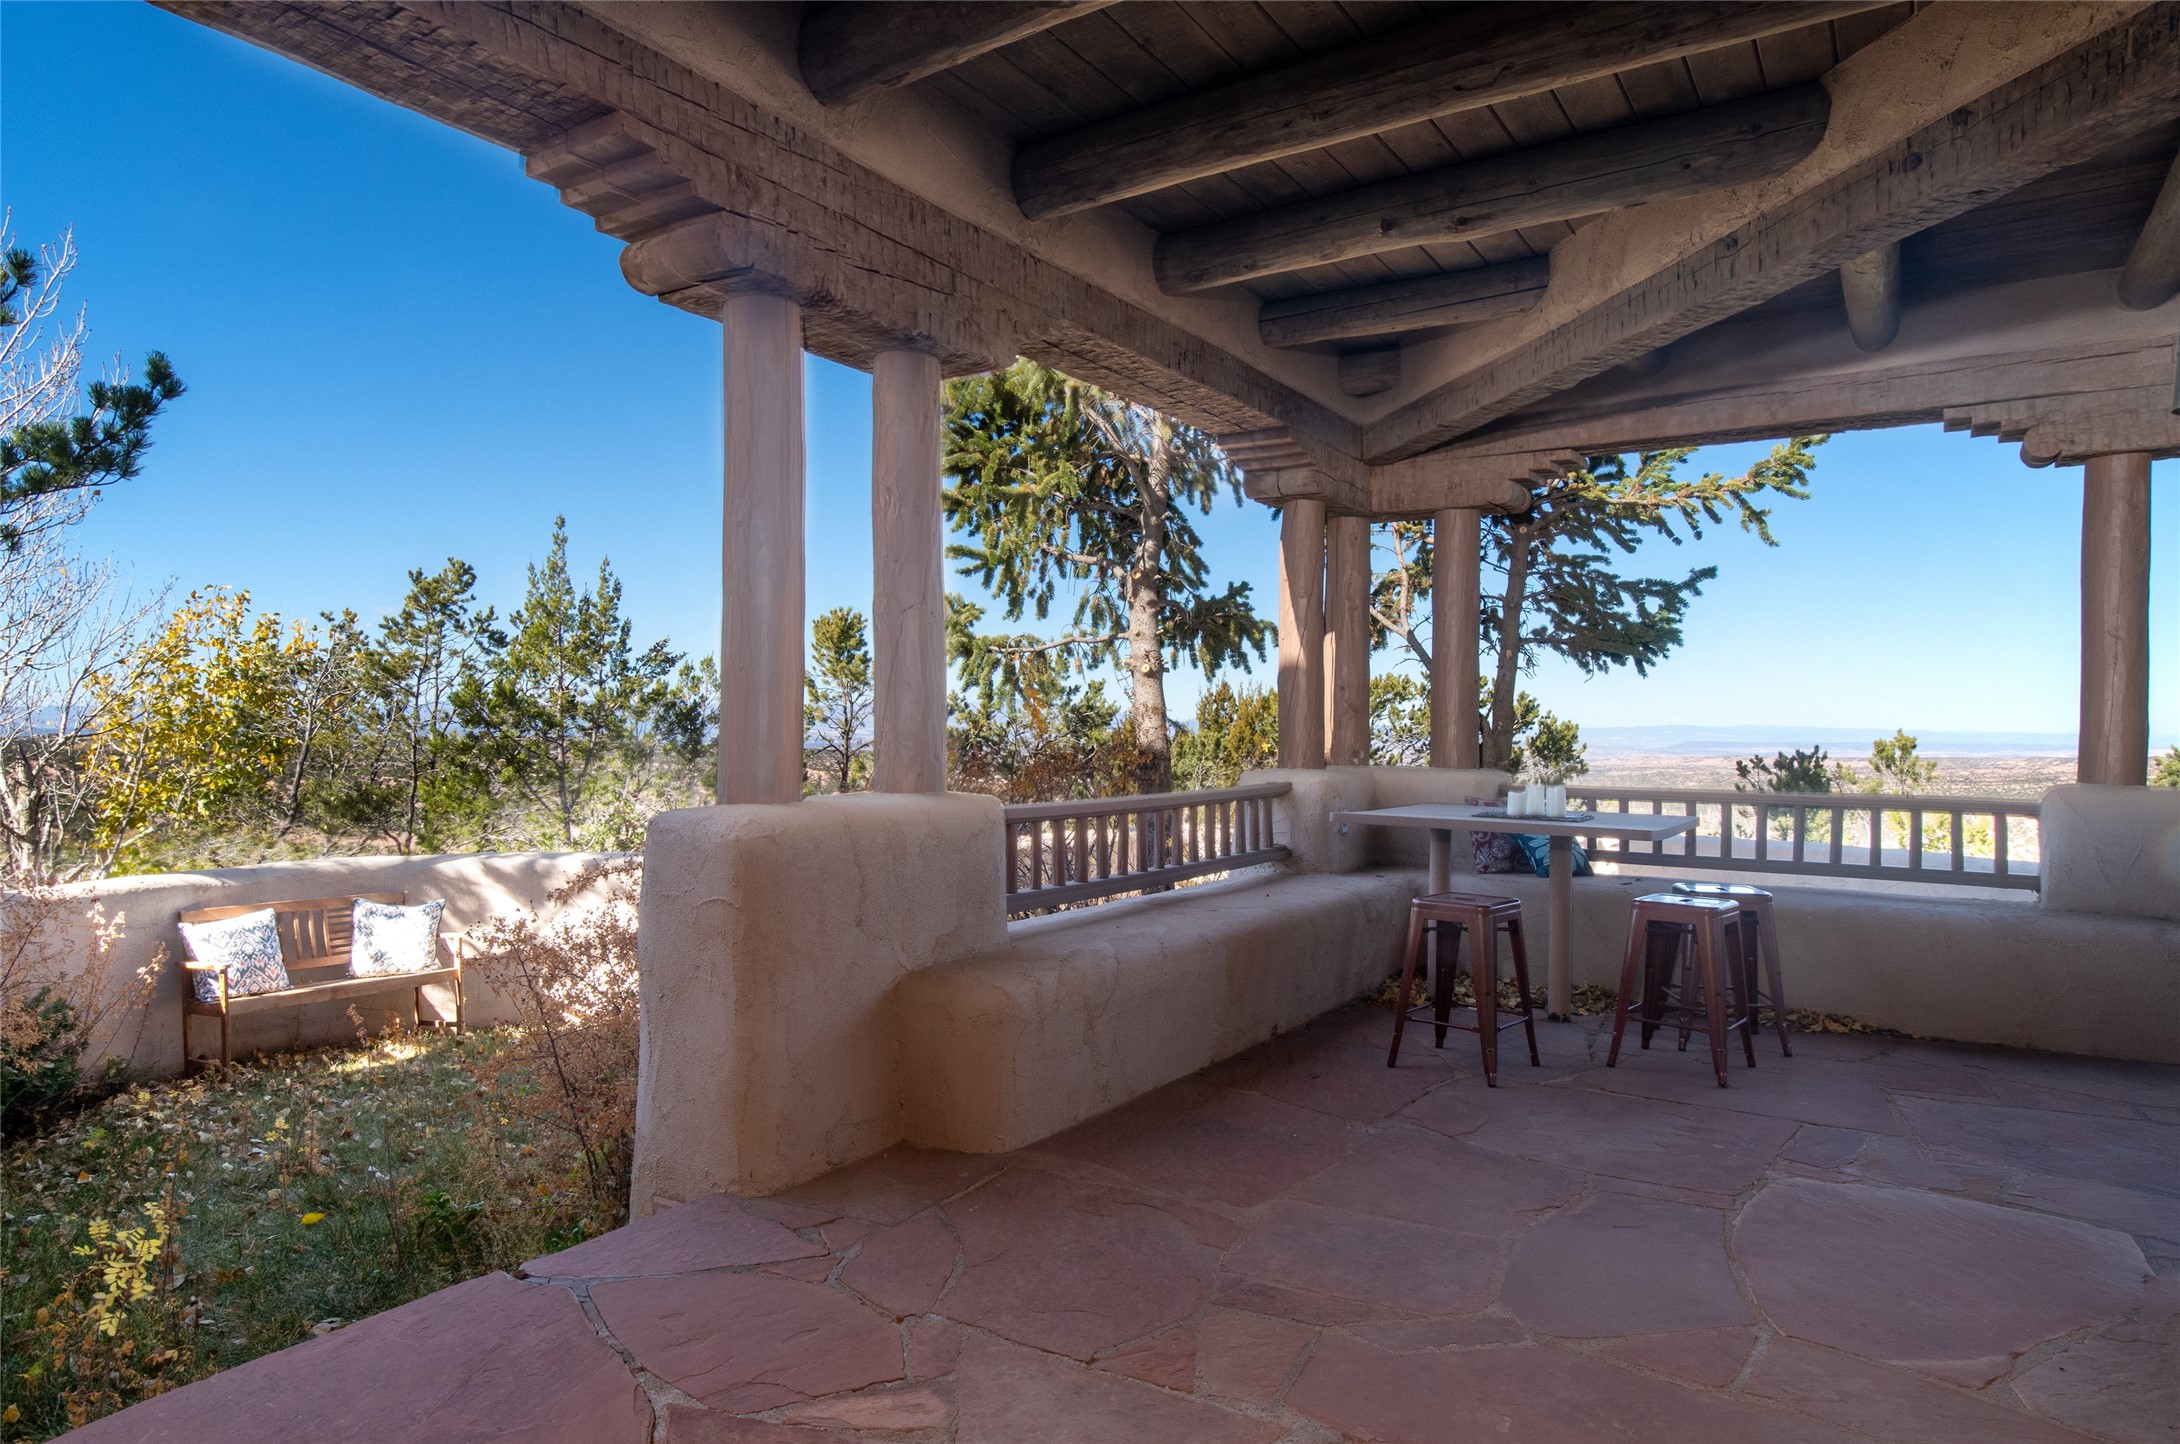 200 Brownell Howland Road, Santa Fe, New Mexico 87501, 3 Bedrooms Bedrooms, ,6 BathroomsBathrooms,Residential,For Sale,200 Brownell Howland Road,202234361